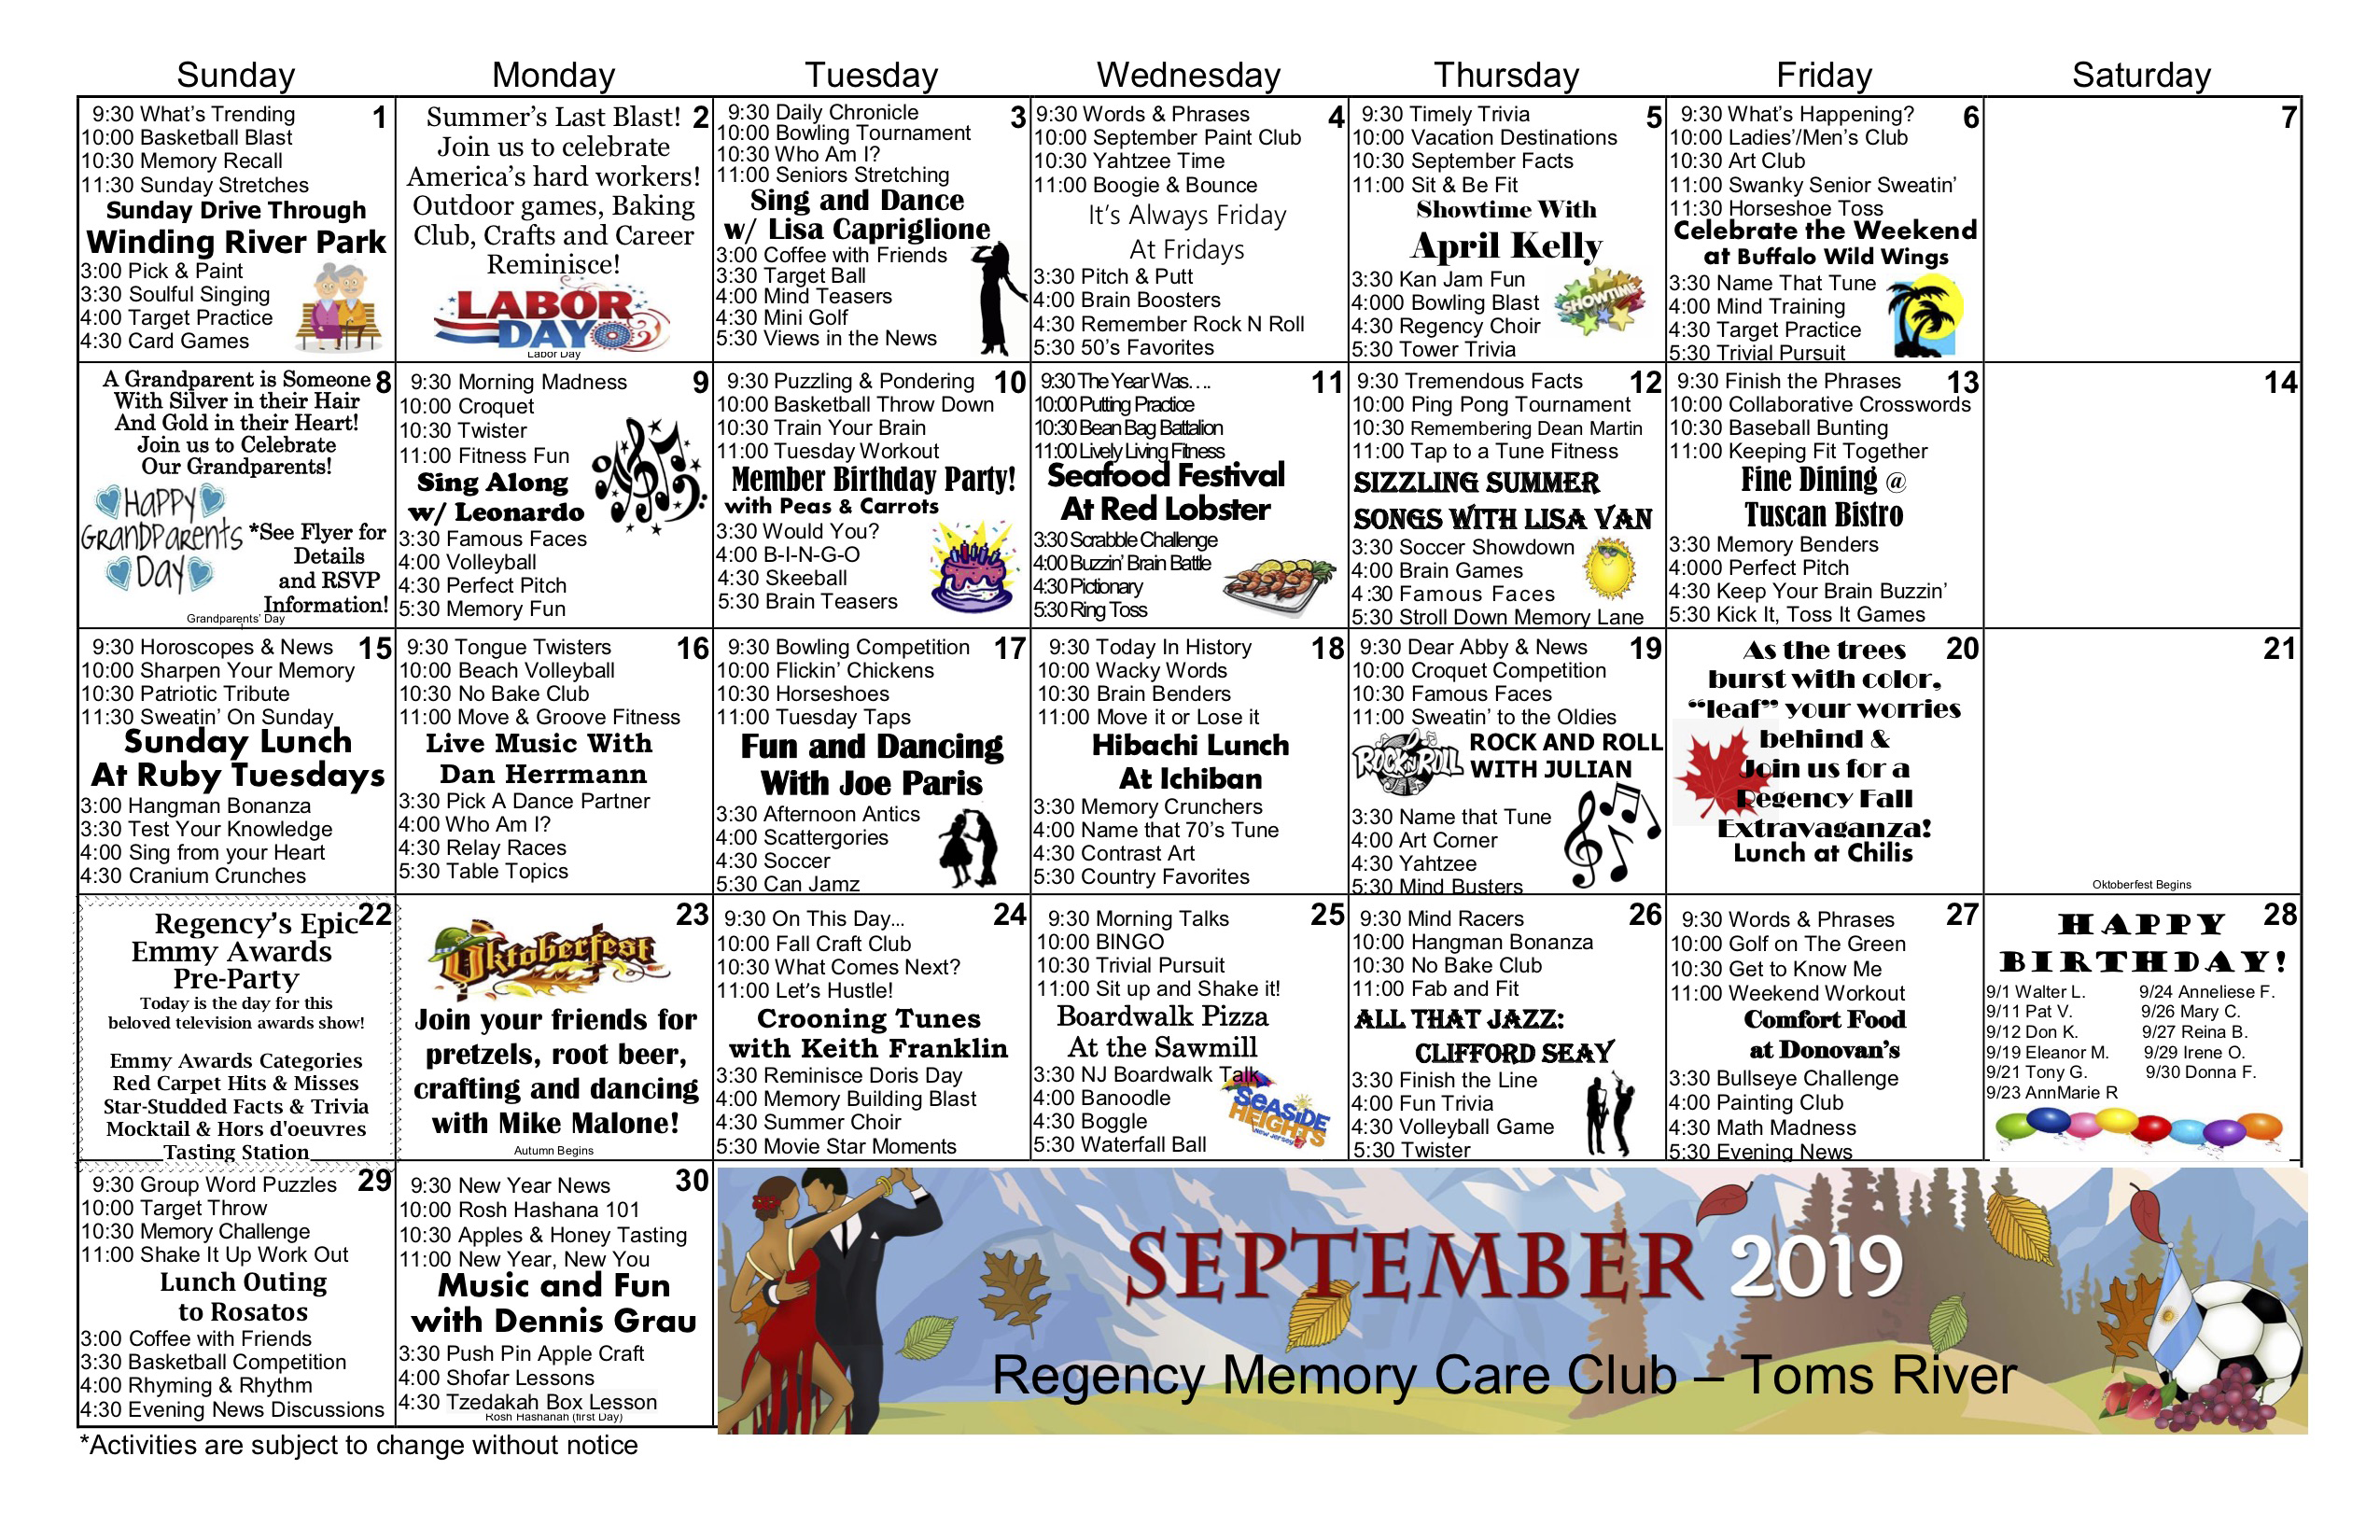 Toms River Memory Care Events